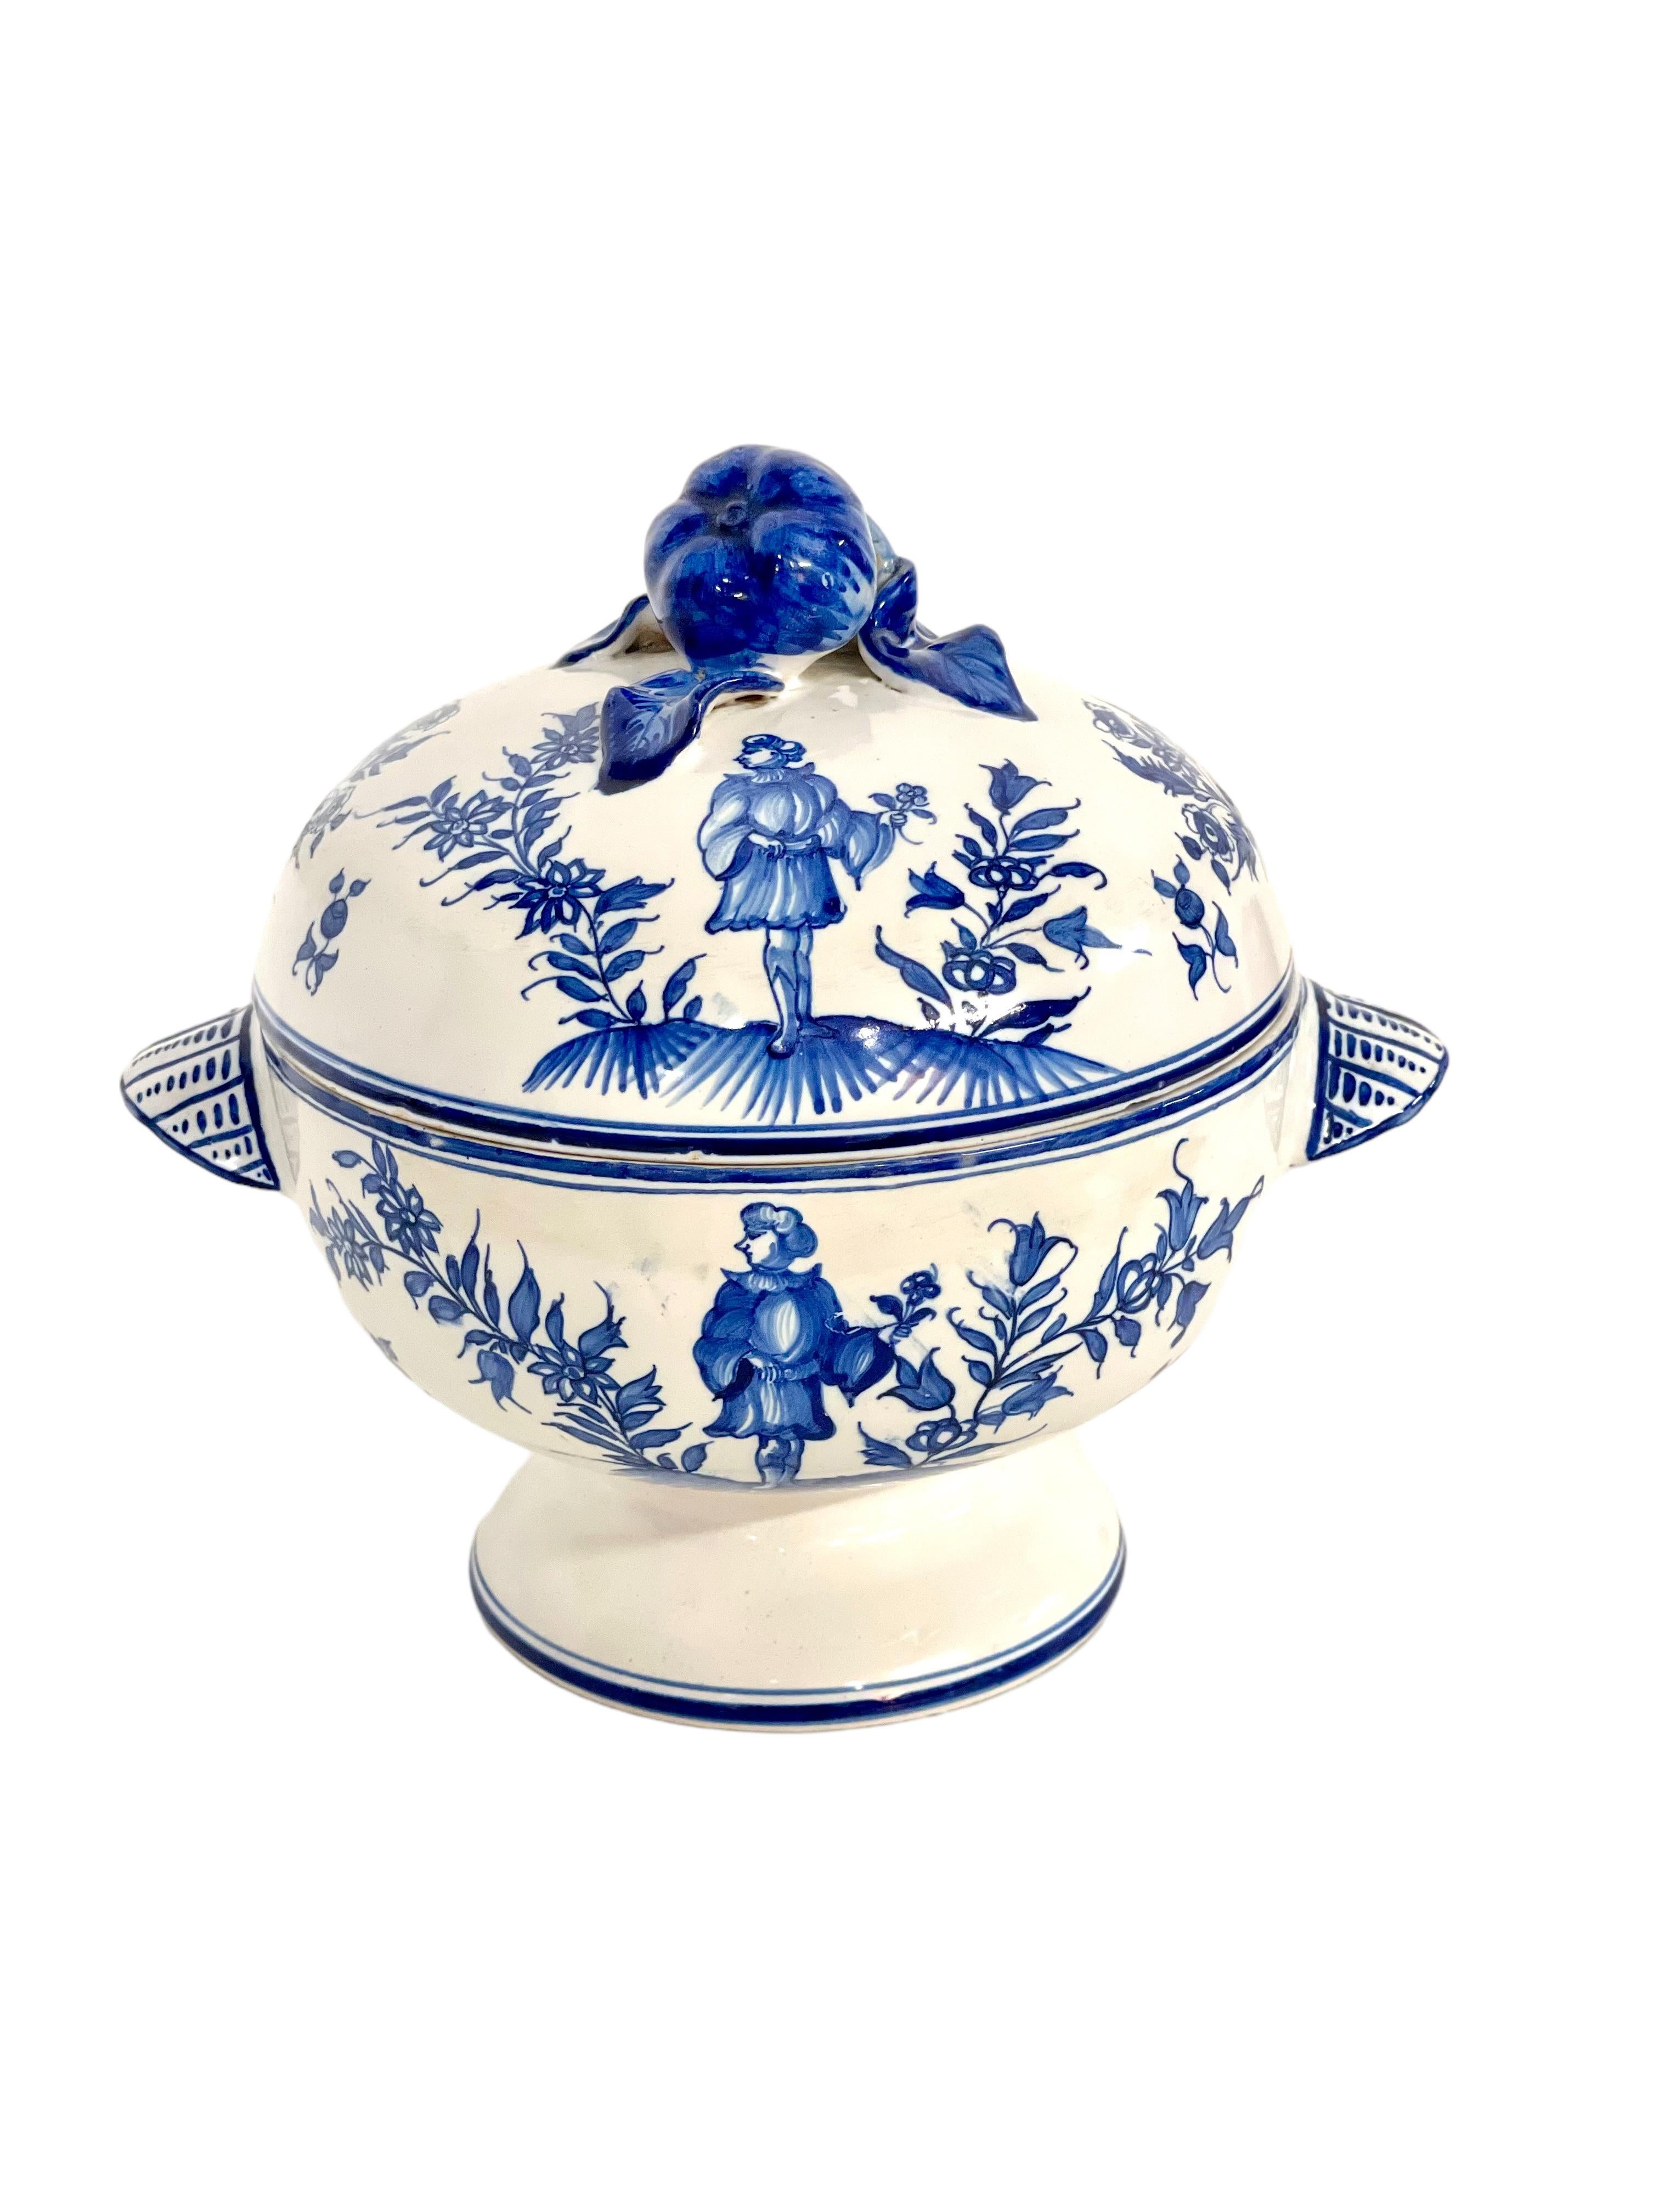 Blue and White Earthenware Lidded Tureen with Fantastical Decoration For Sale 9